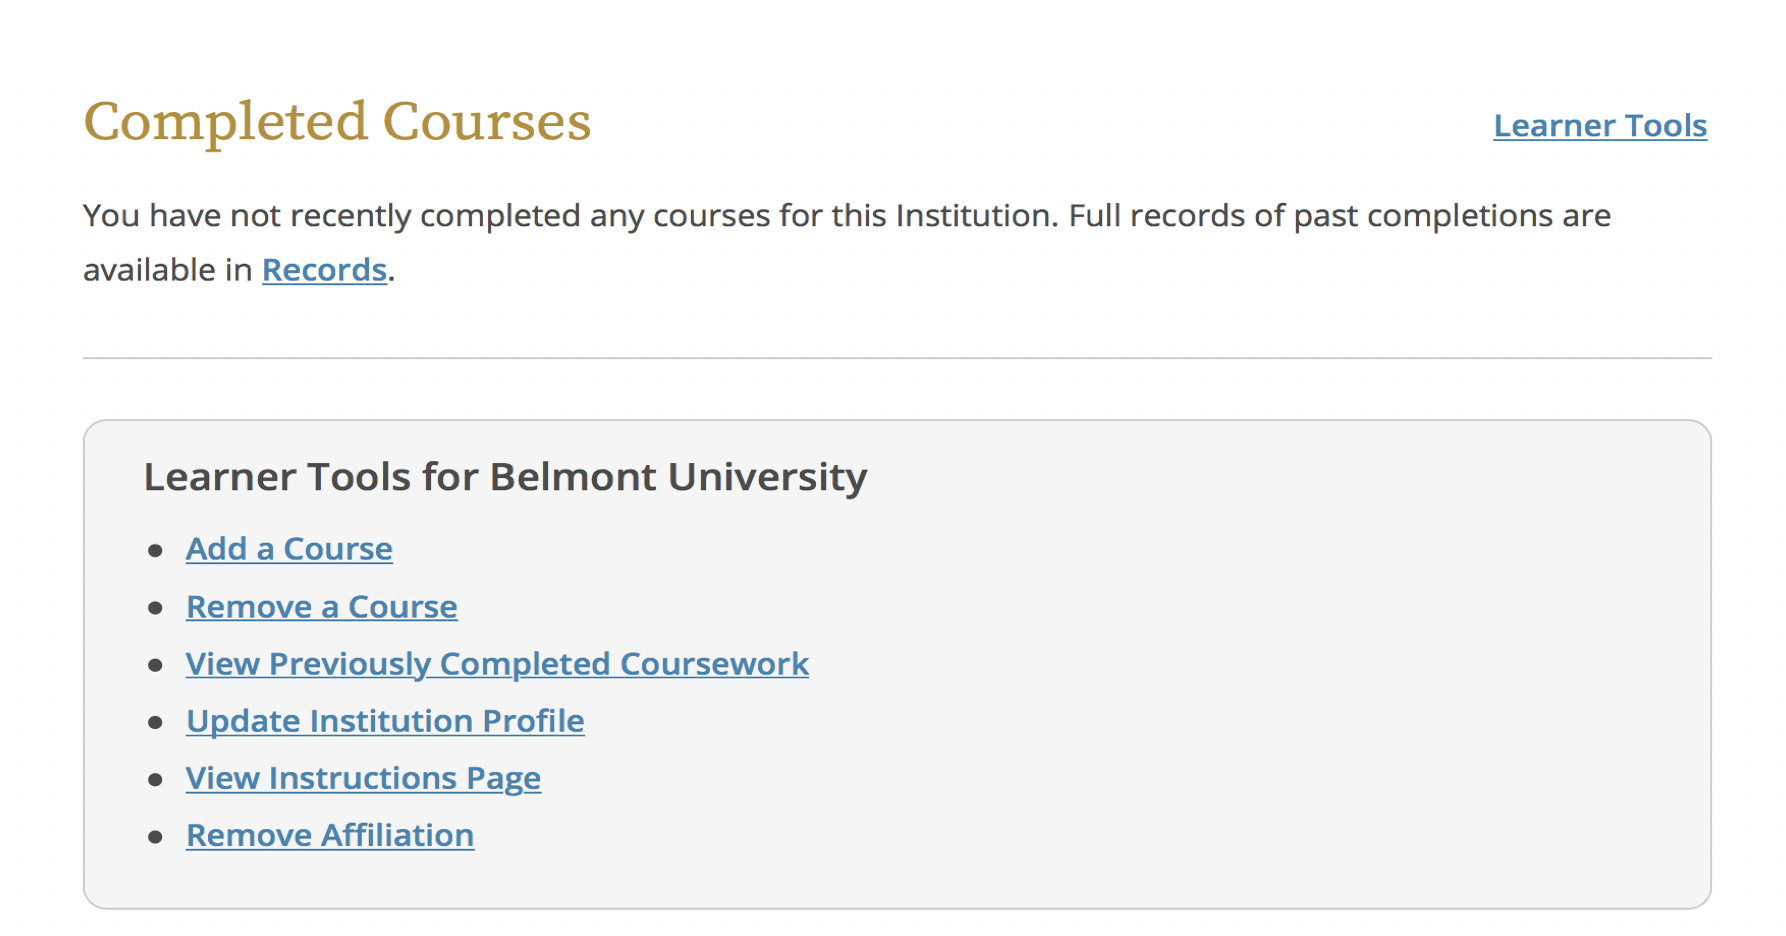  screen shot showing completed courses